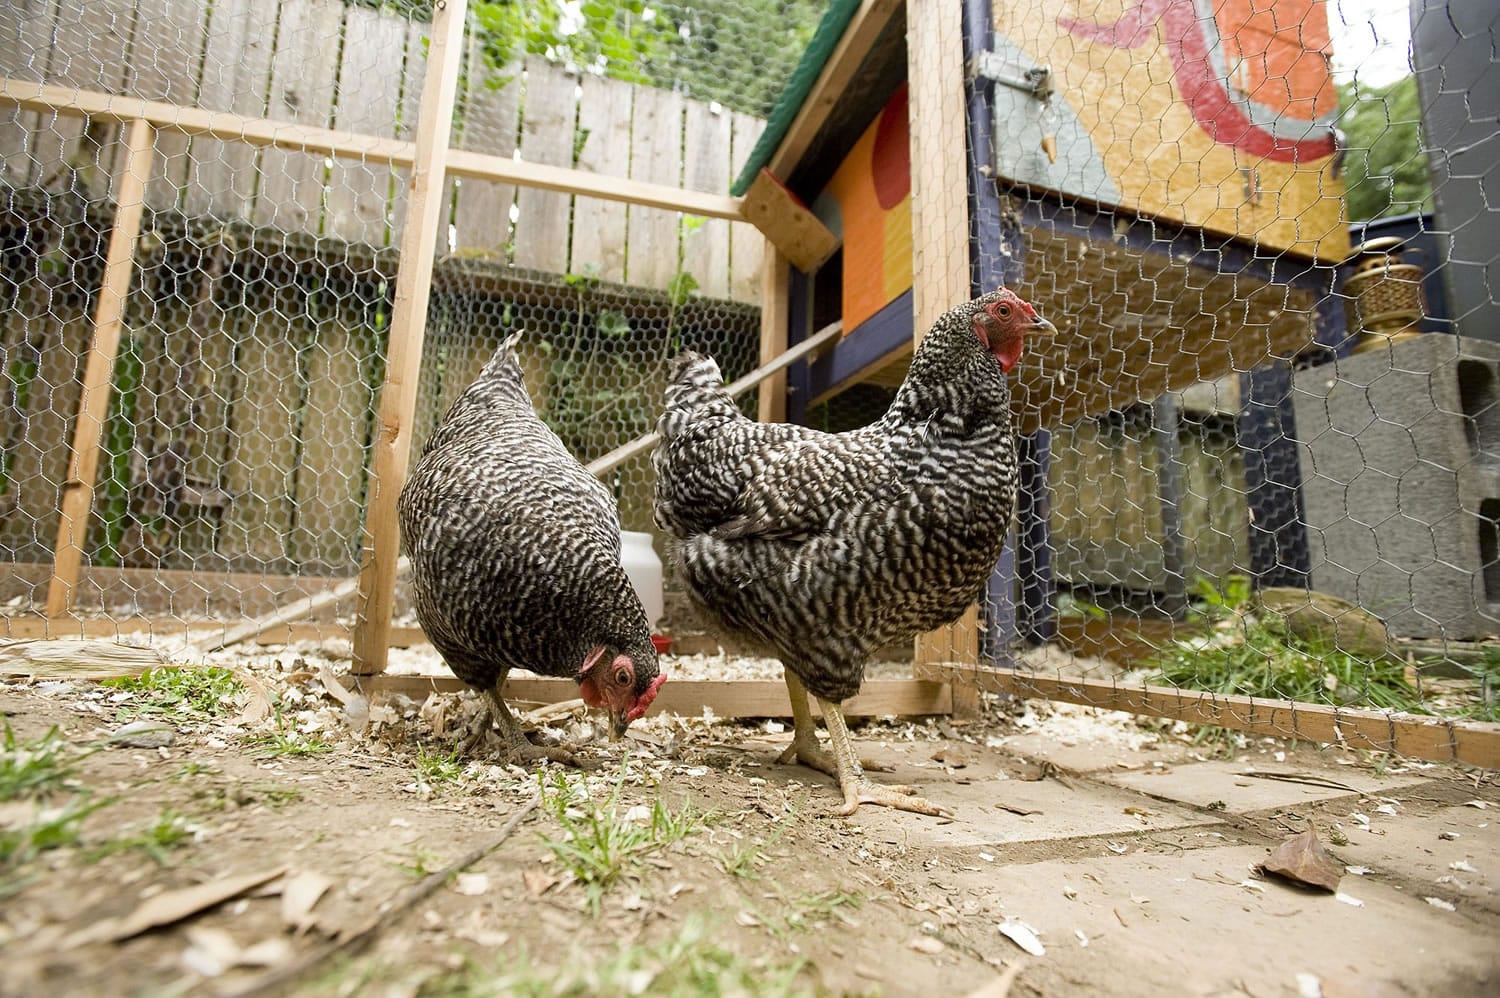 Eileen Cowen's chickens and their coop will be part f the Coop Du Jour on July 30.